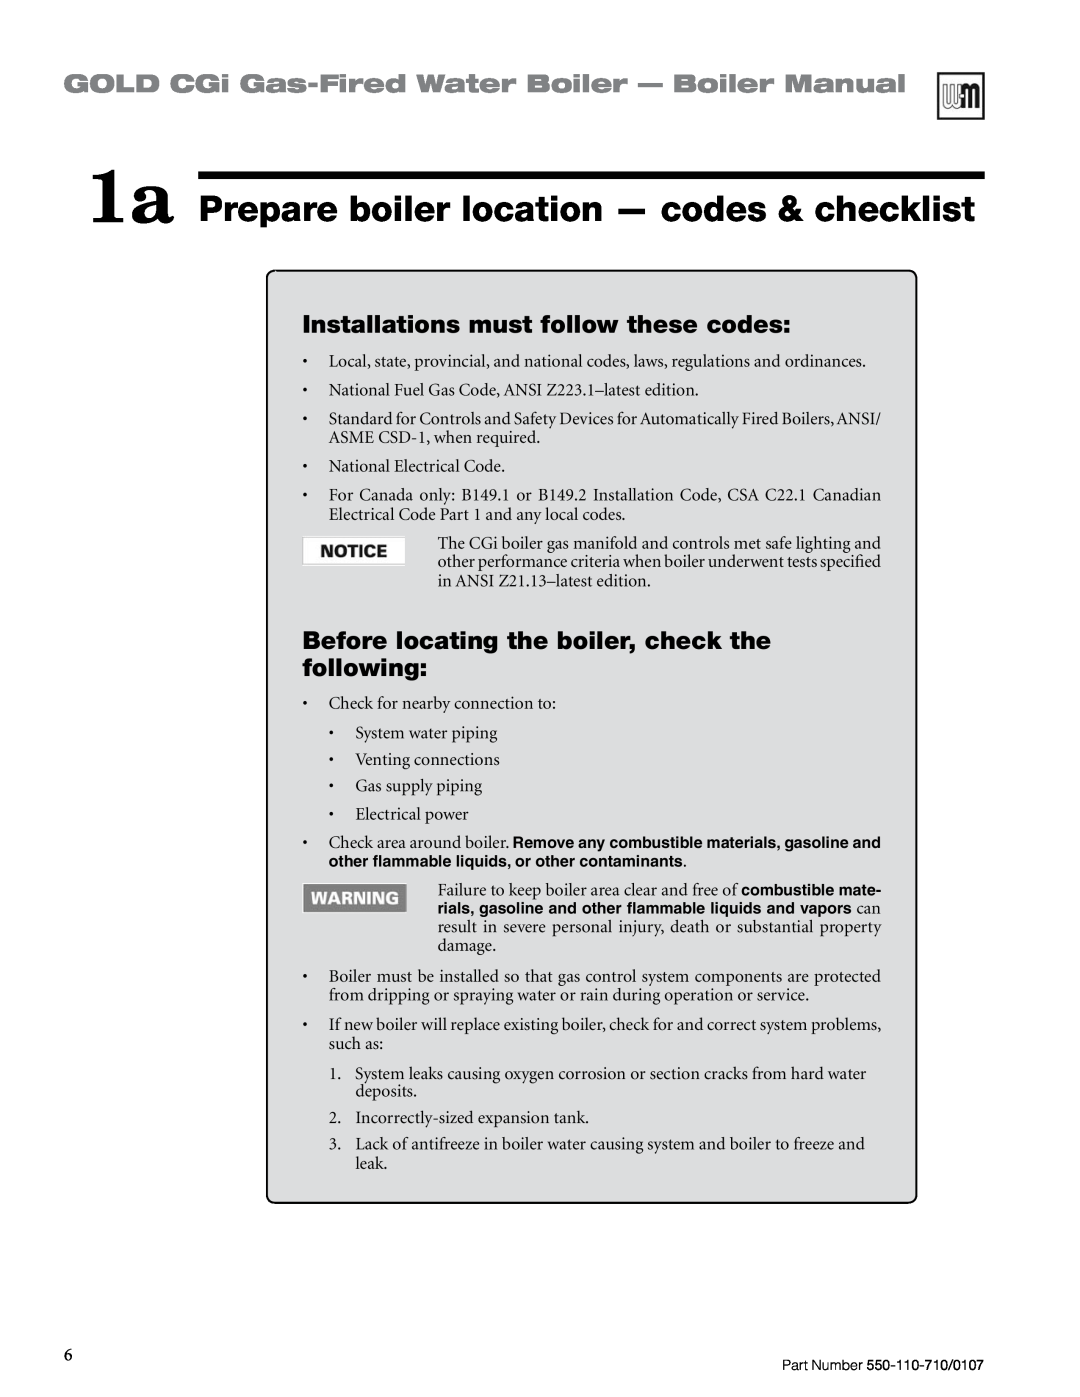 Weil-McLain 550-110-710/0107 manual 1a Prepare boiler location — codes & checklist, Installations must follow these codes 